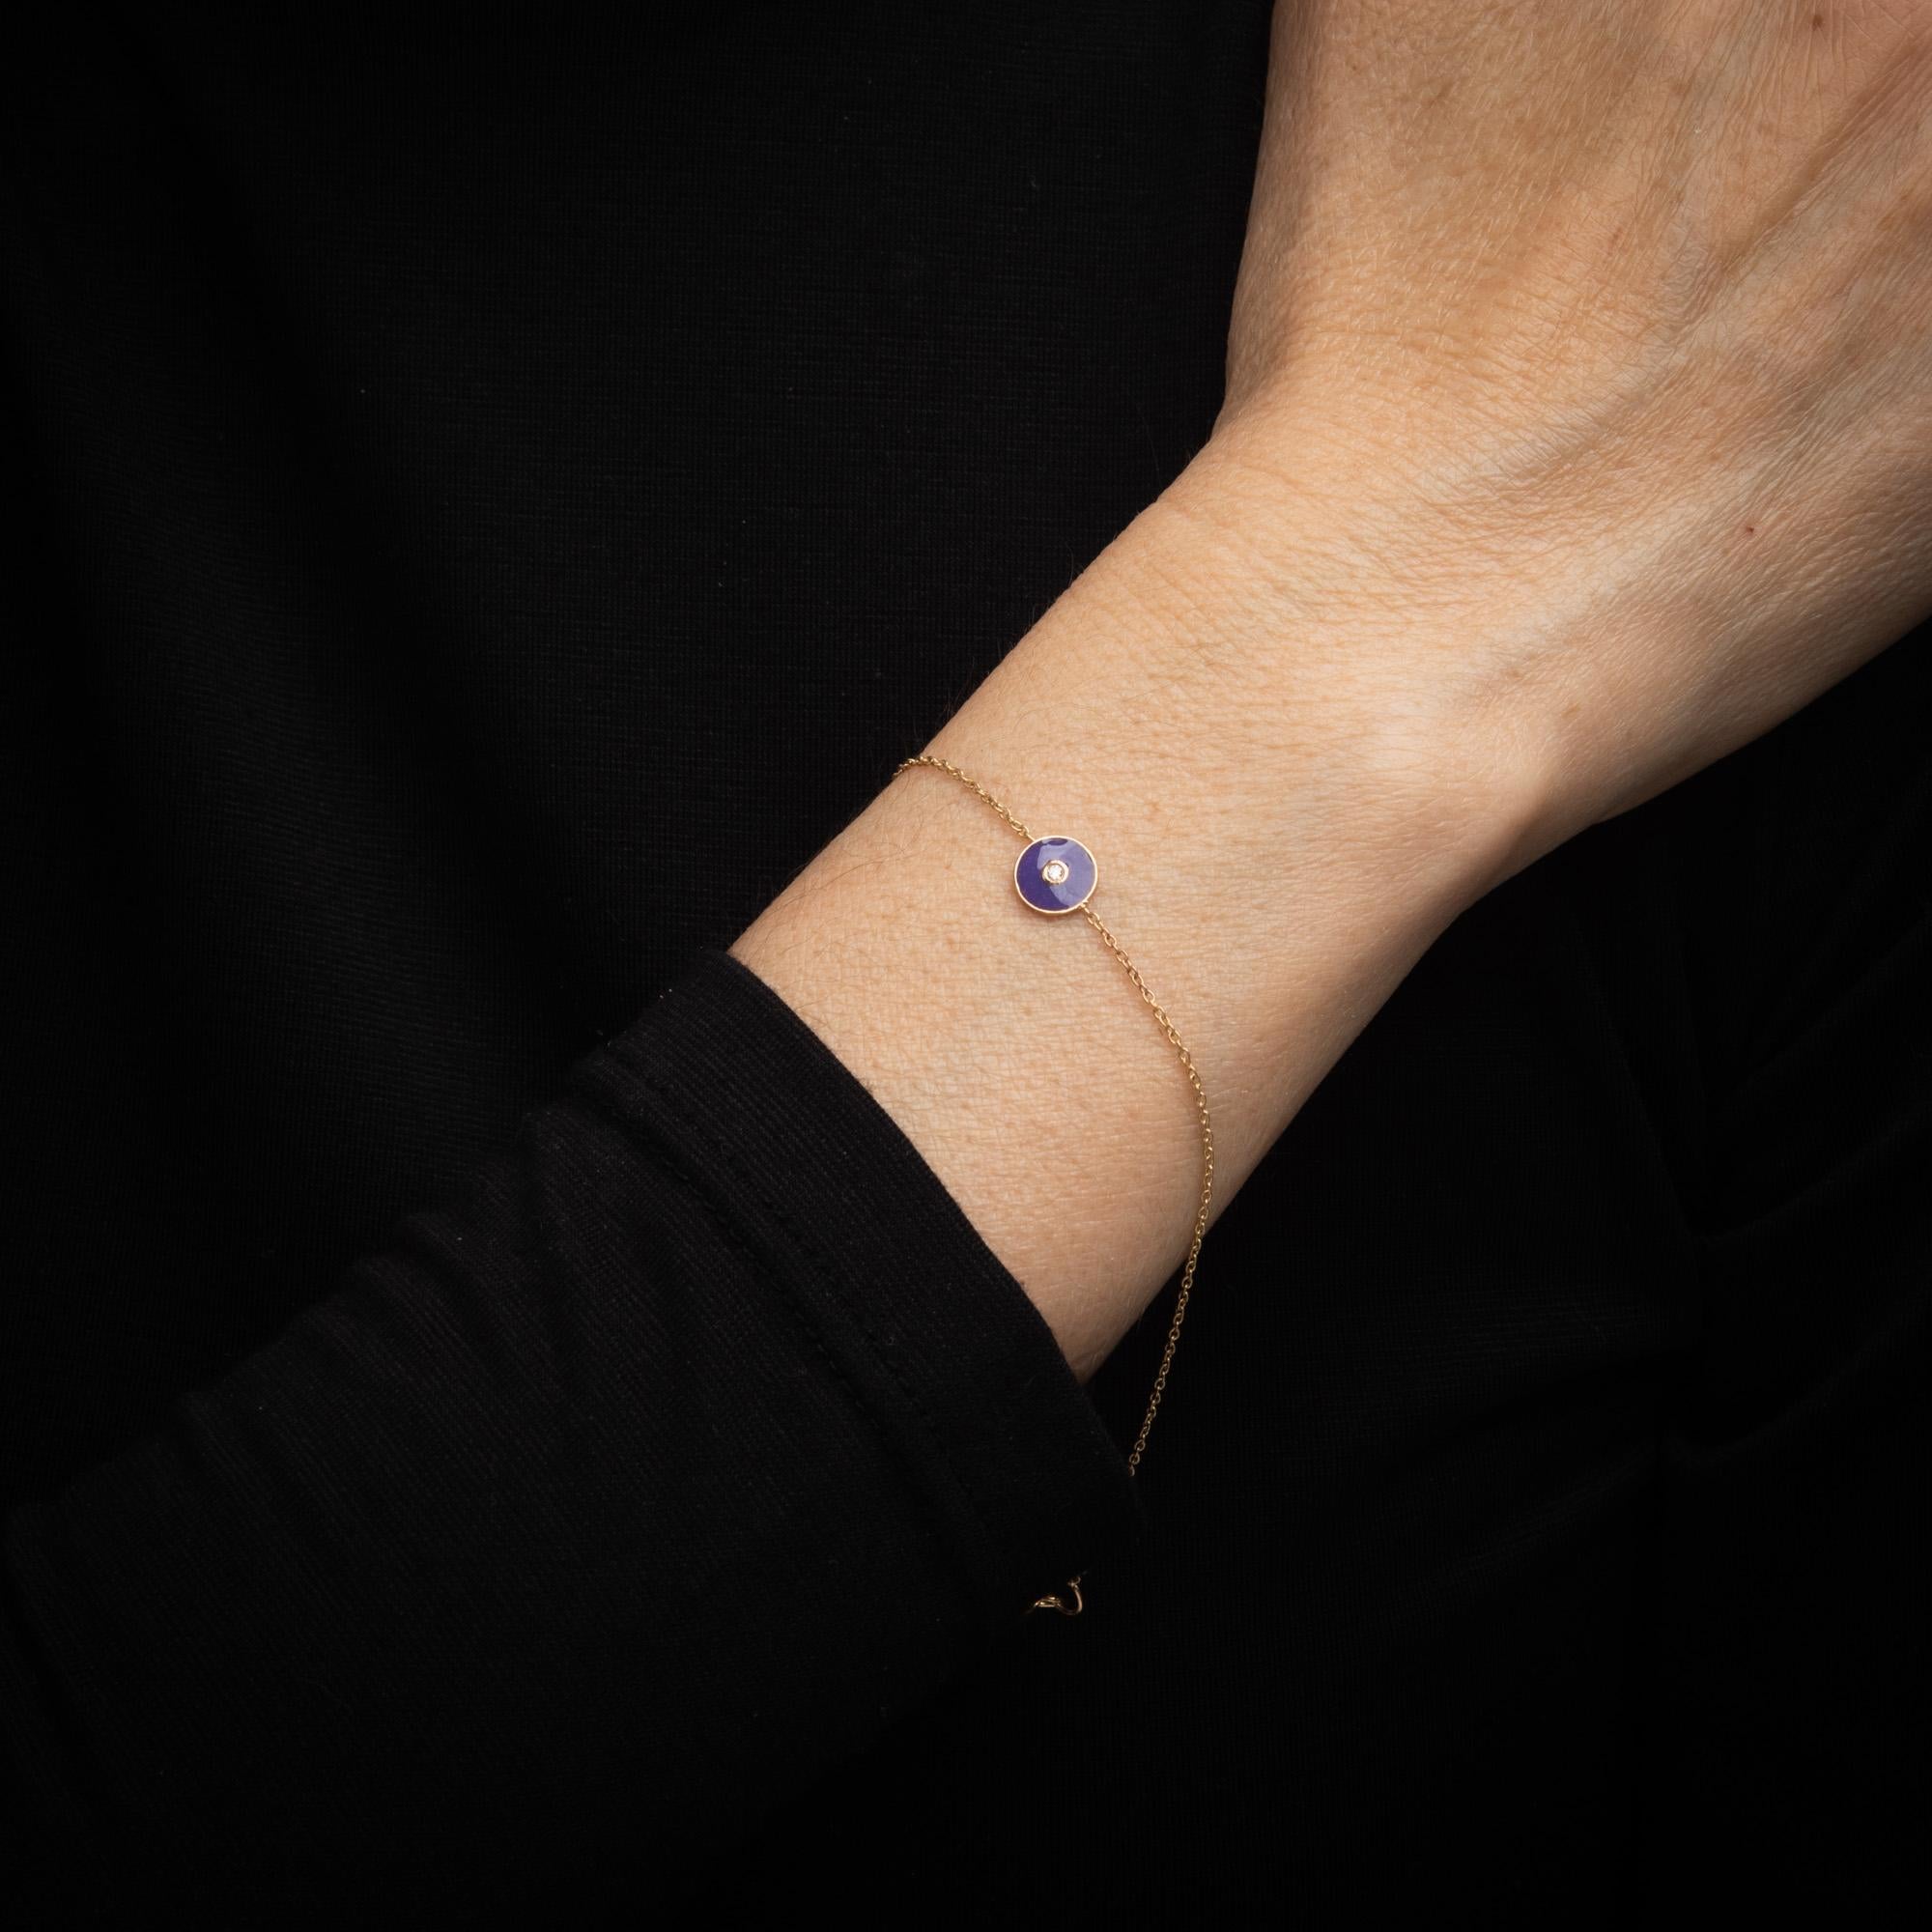 Finely detailed purple enamel & diamond bracelet crafted in 14k yellow gold. 

One estimated 0.02 carat diamond is set into the mount (estimated at H-I color and SI1 clarity).     

The purple enamel is set into a small round disc mount with a small